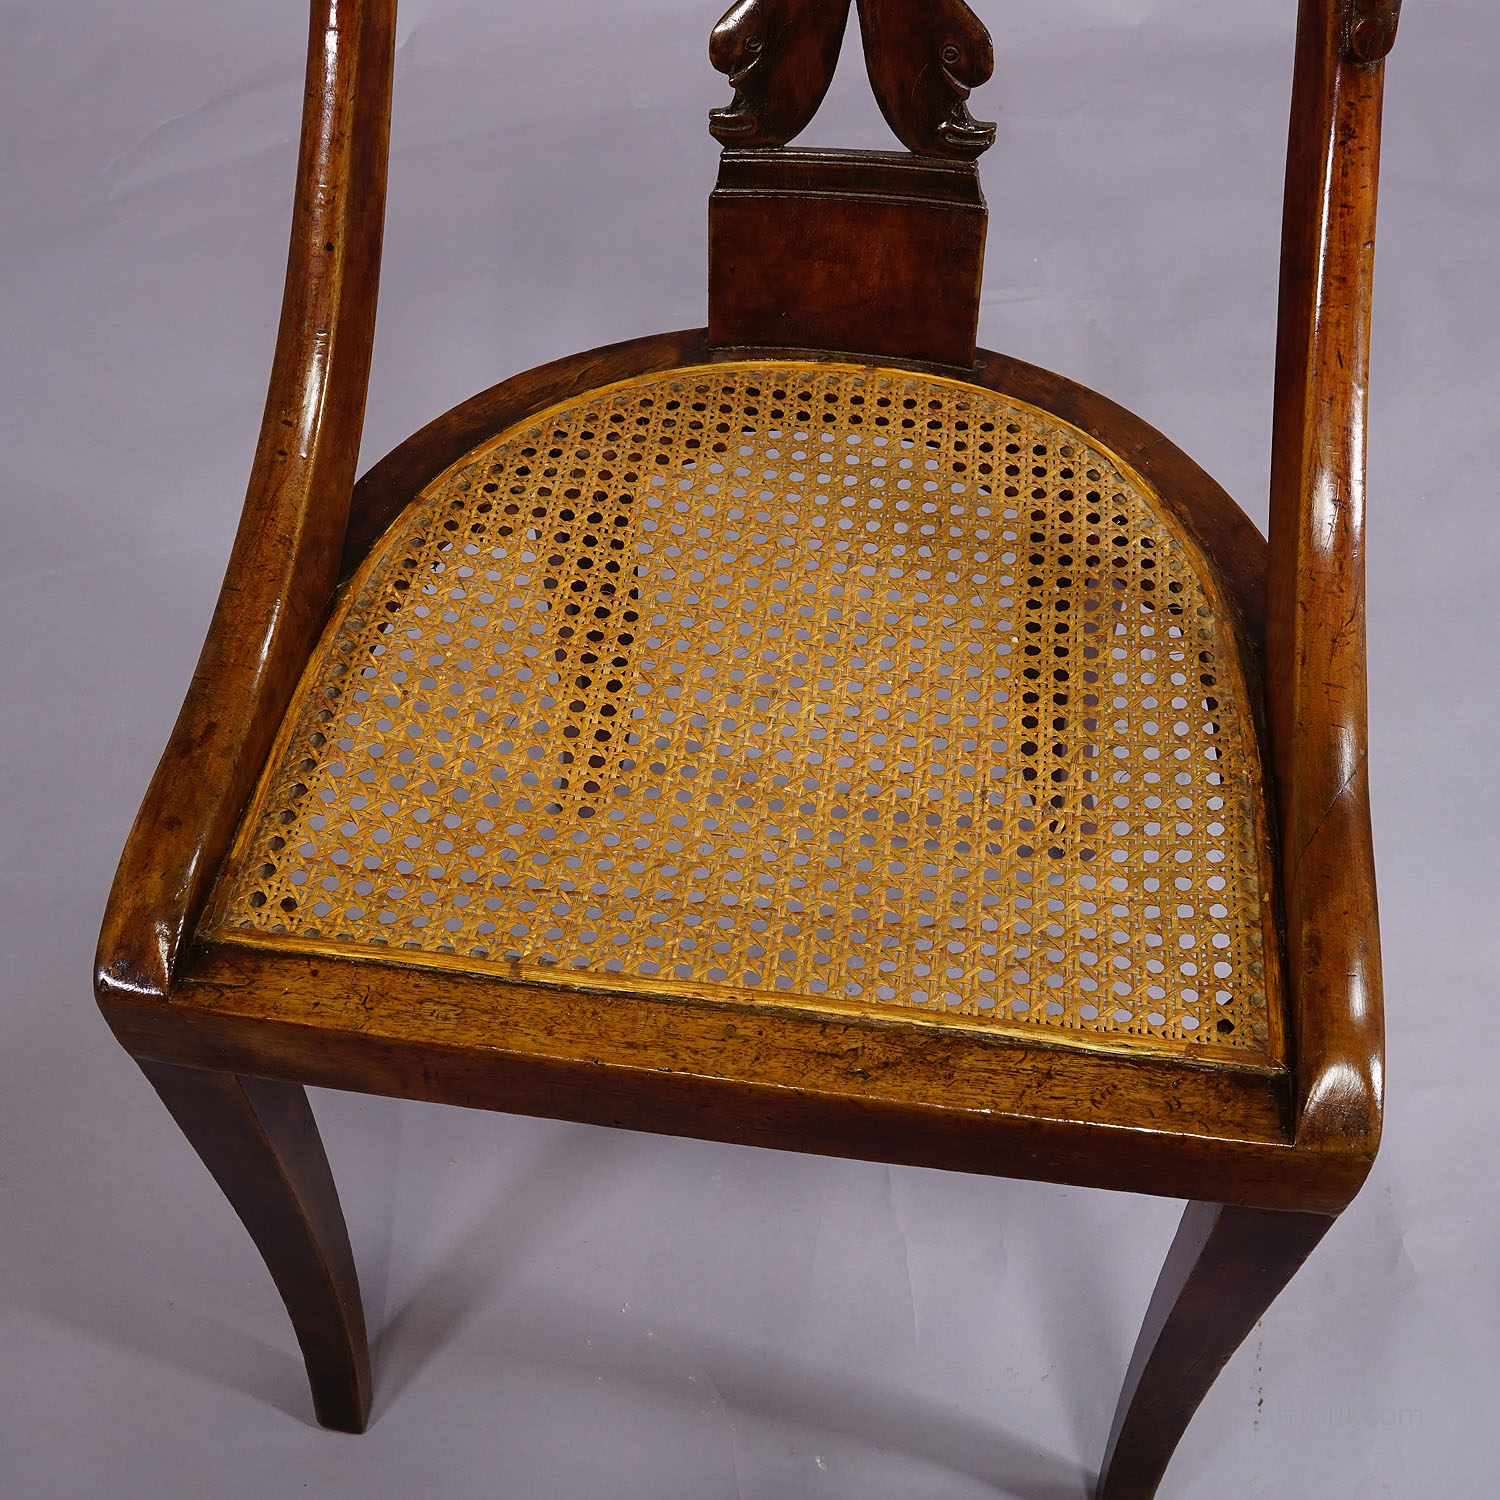 Pair of Hand-Crafted Biedermeier Chairs with Swan and Dolphin Backrests